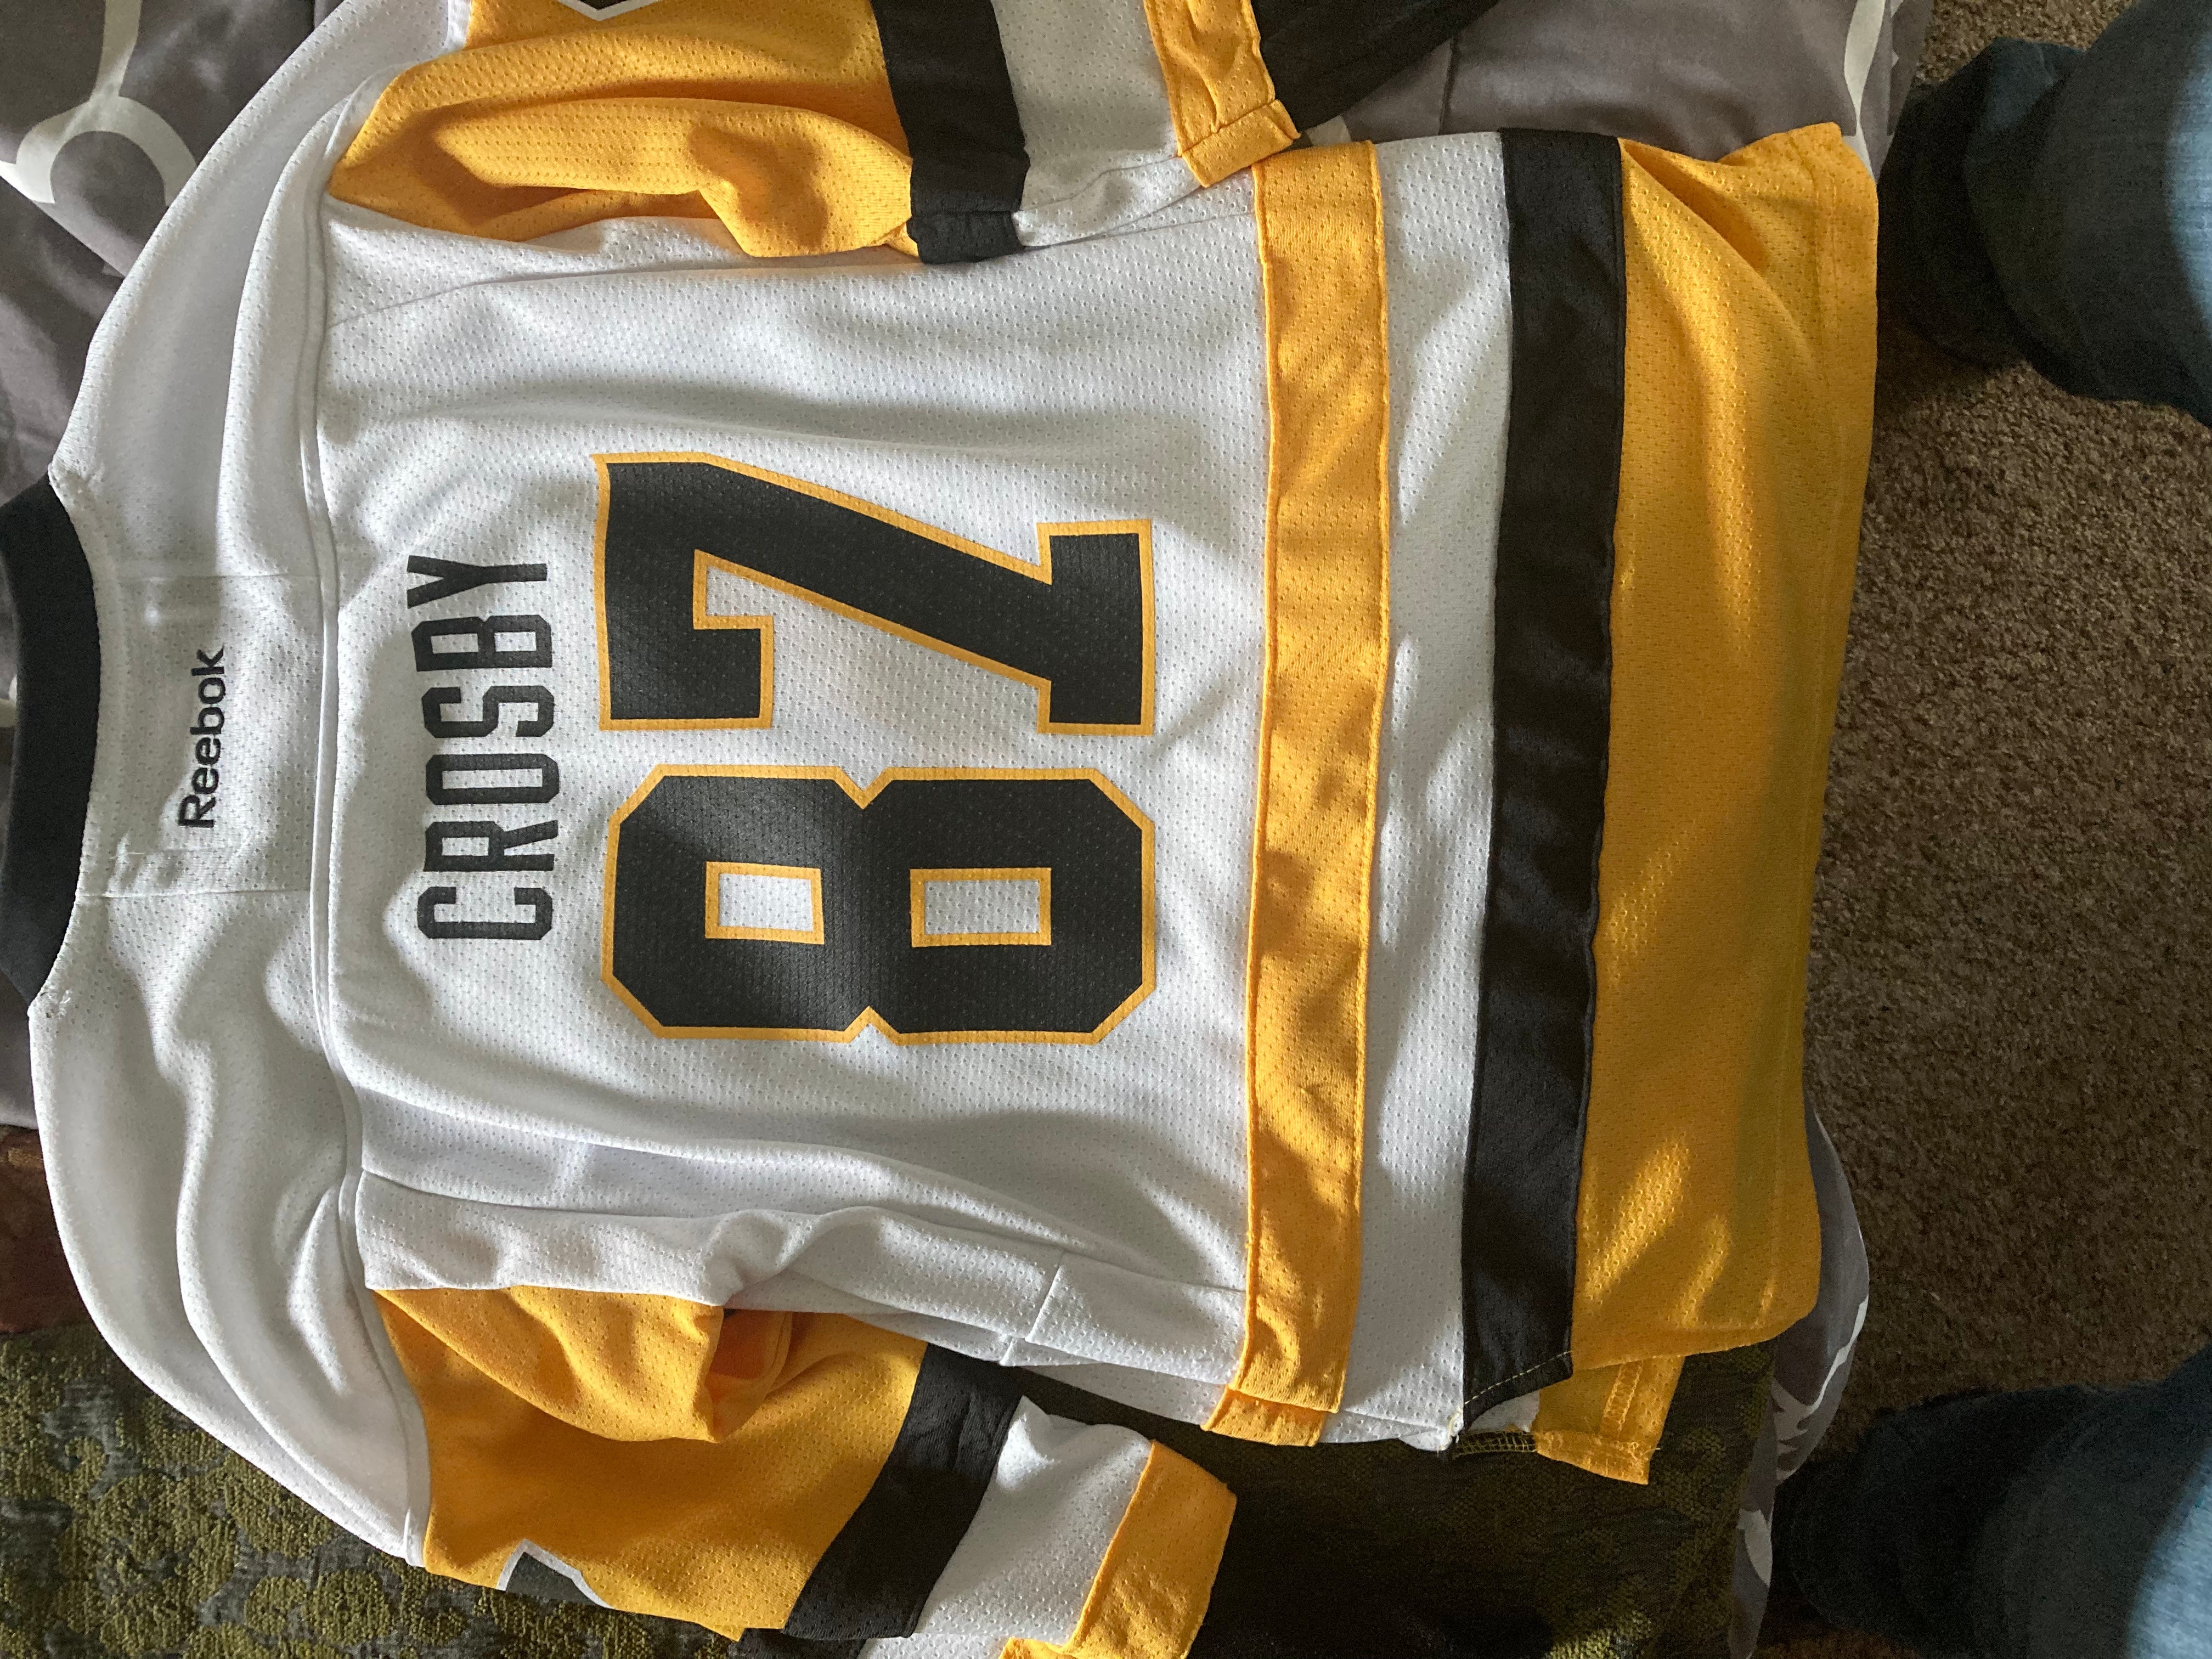 Youth Reebok Pittsburgh Penguins Sydney Crosby Jersey –